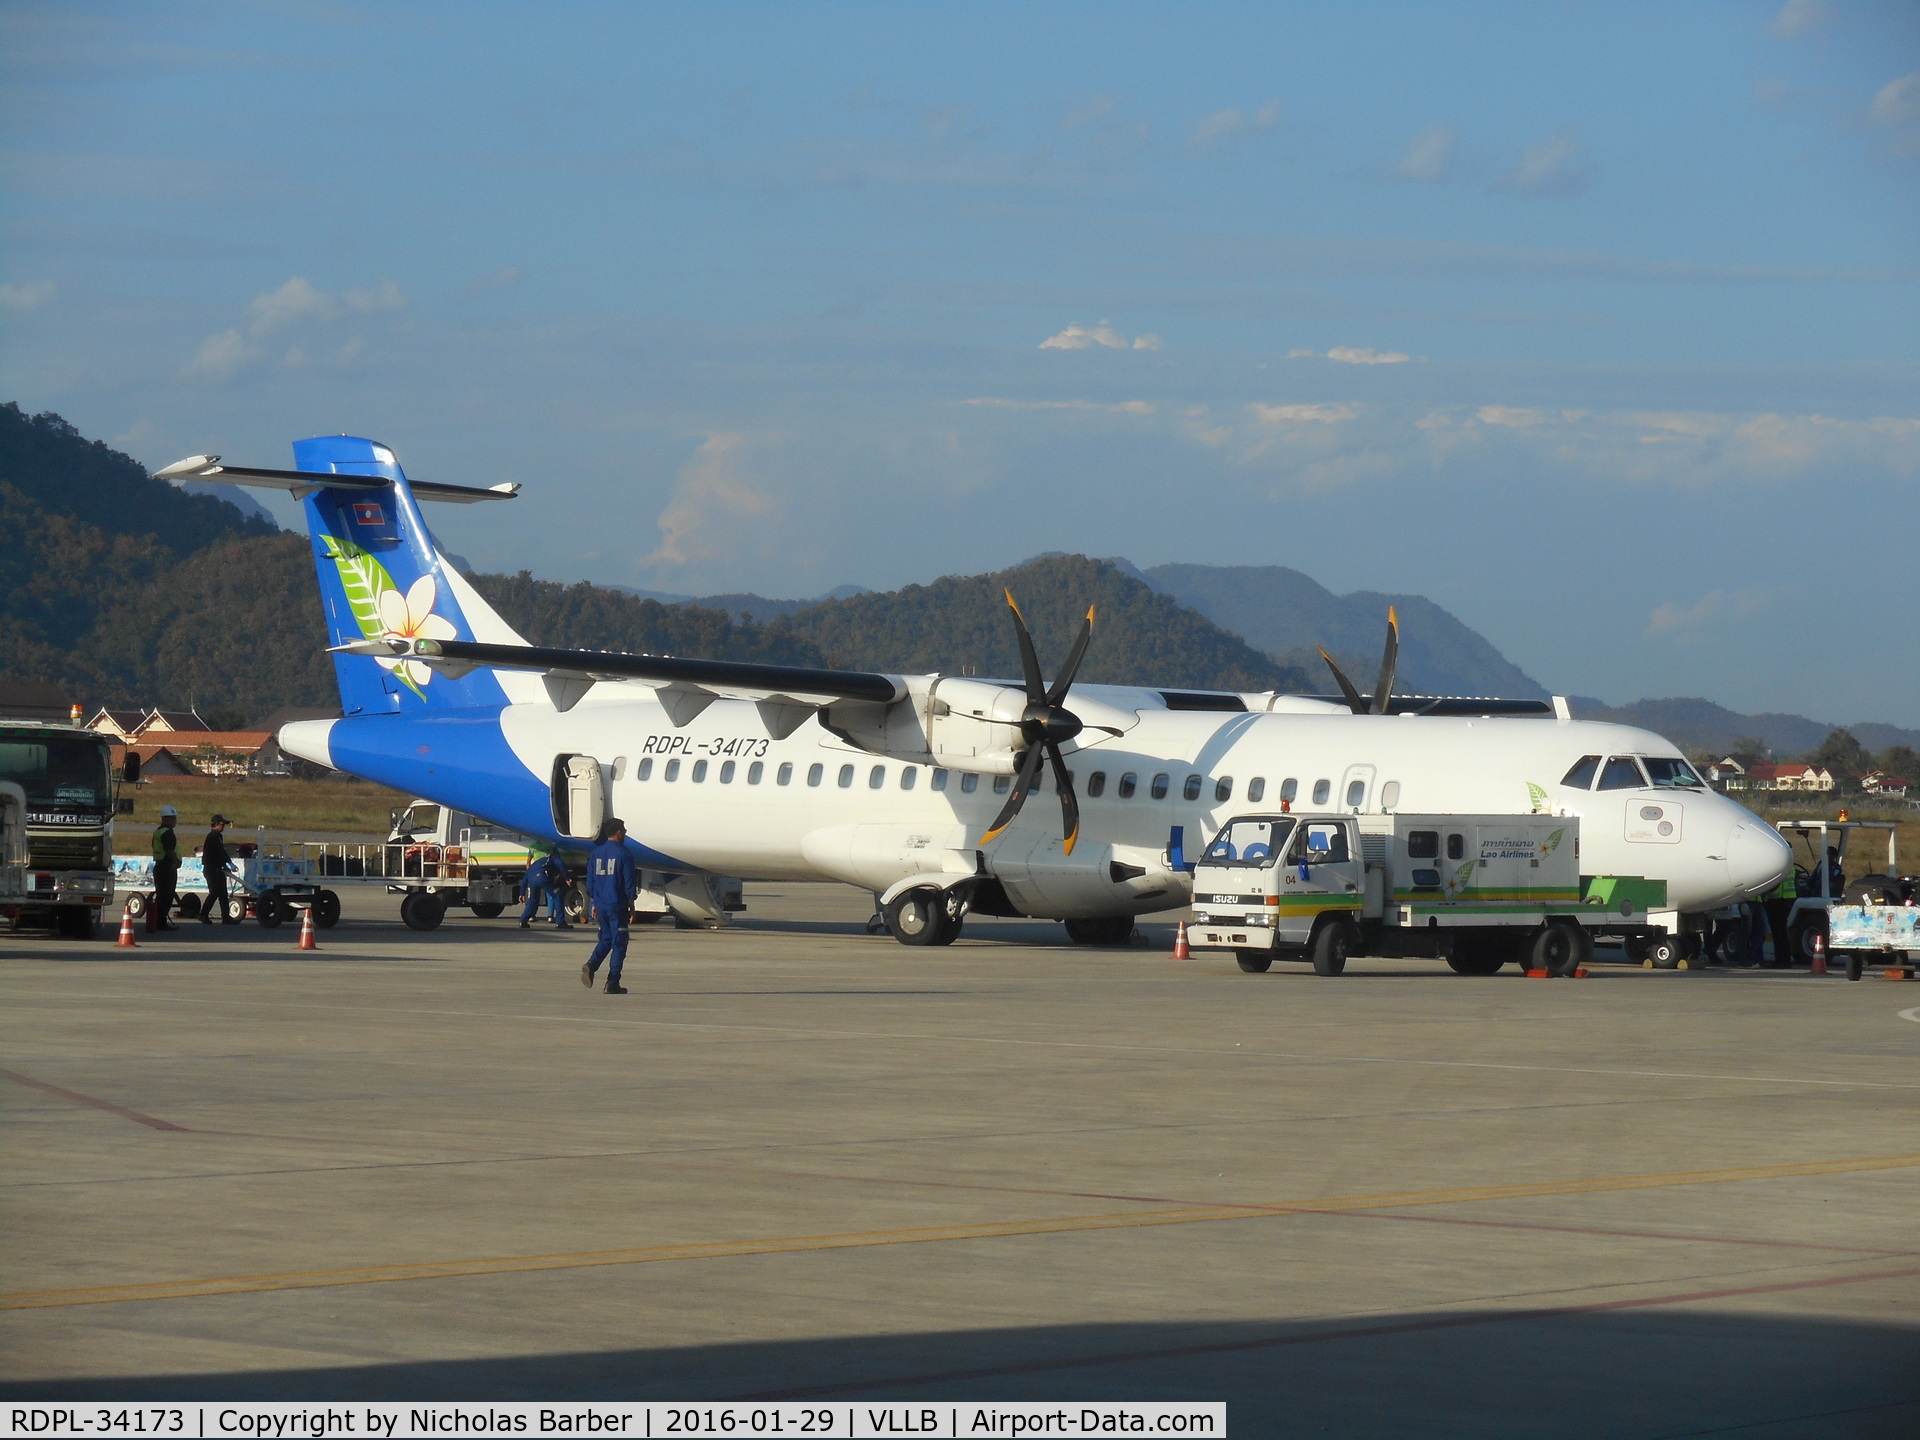 RDPL-34173, 2009 ATR 72-212A C/N 870, Lao Airlines ATR 72-212A, RDLP34173 at Luang Prabang airport, preparing to depart with the 1330 flight LLL265 to Vientiane on 29 January 2016.